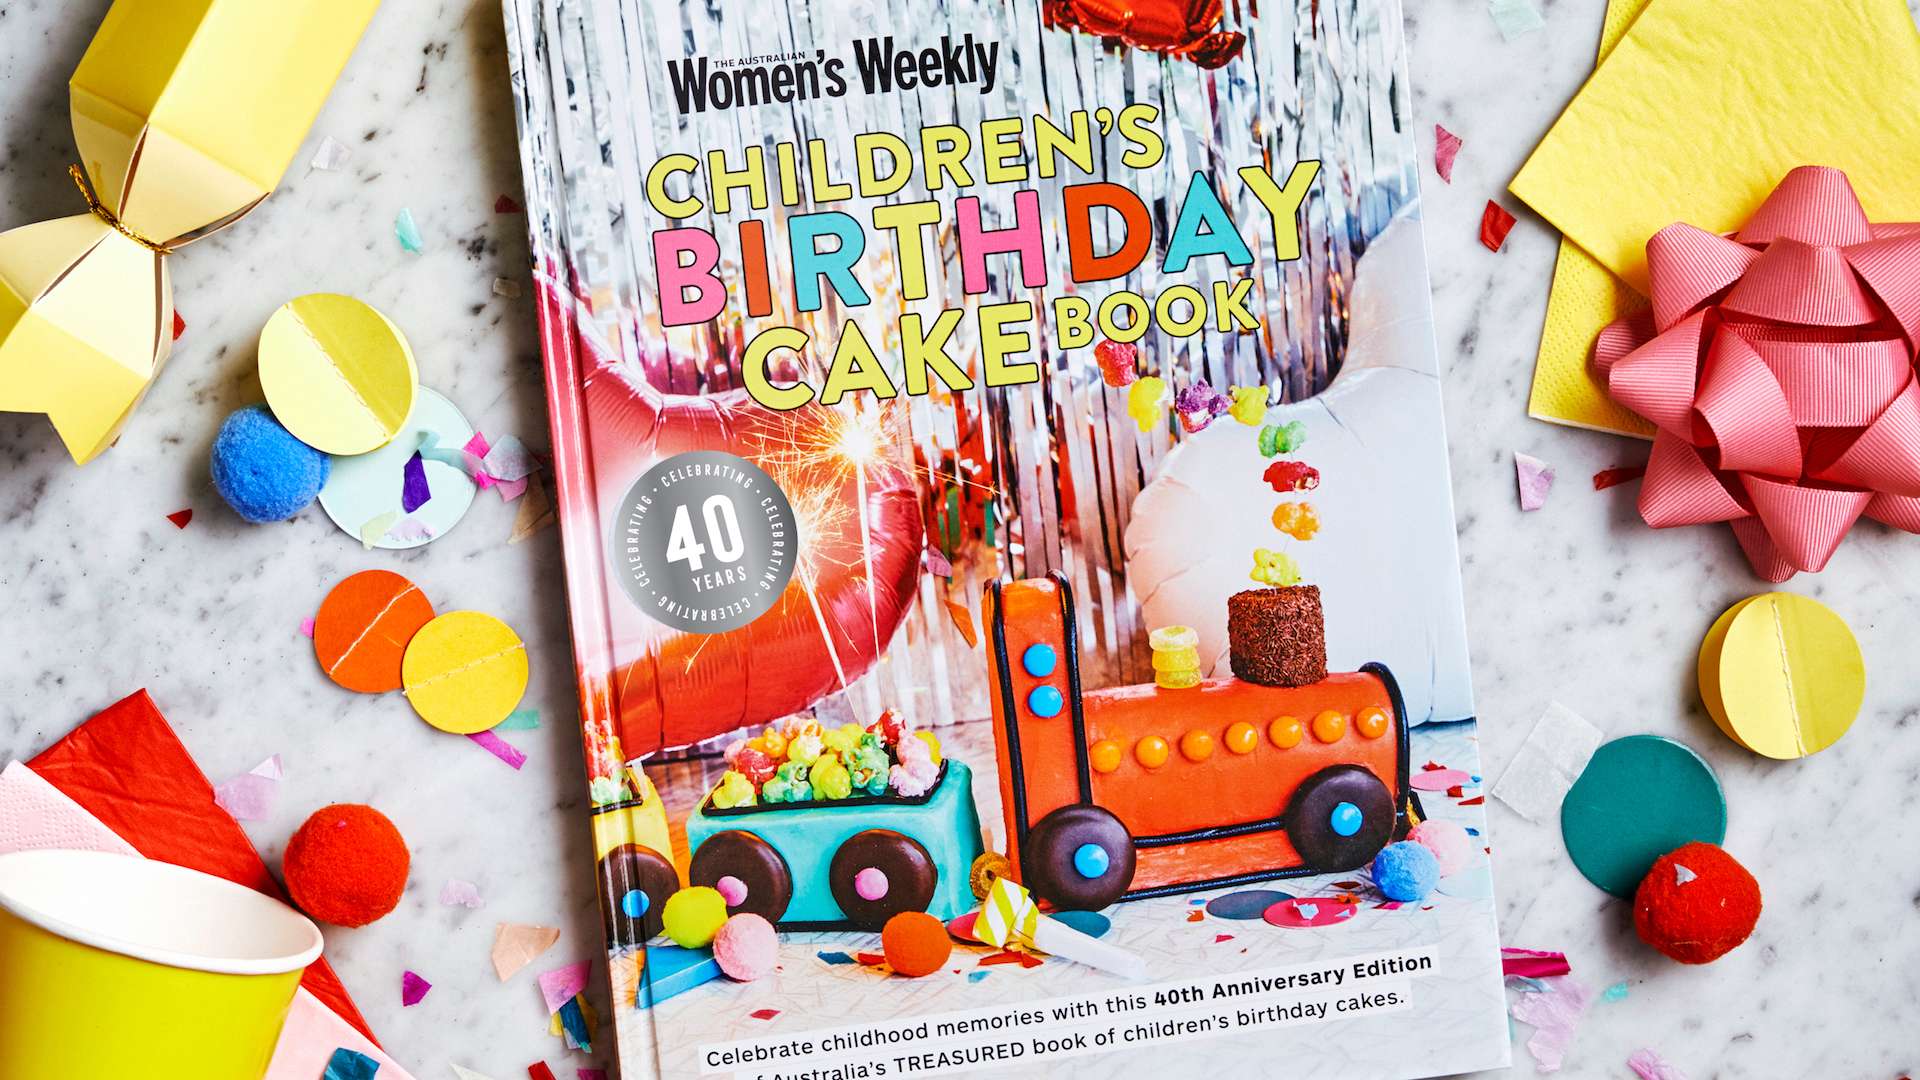 The AWW Is Releasing a 40th Anniversary Edition of Its Beloved Children's Birthday Cake Book